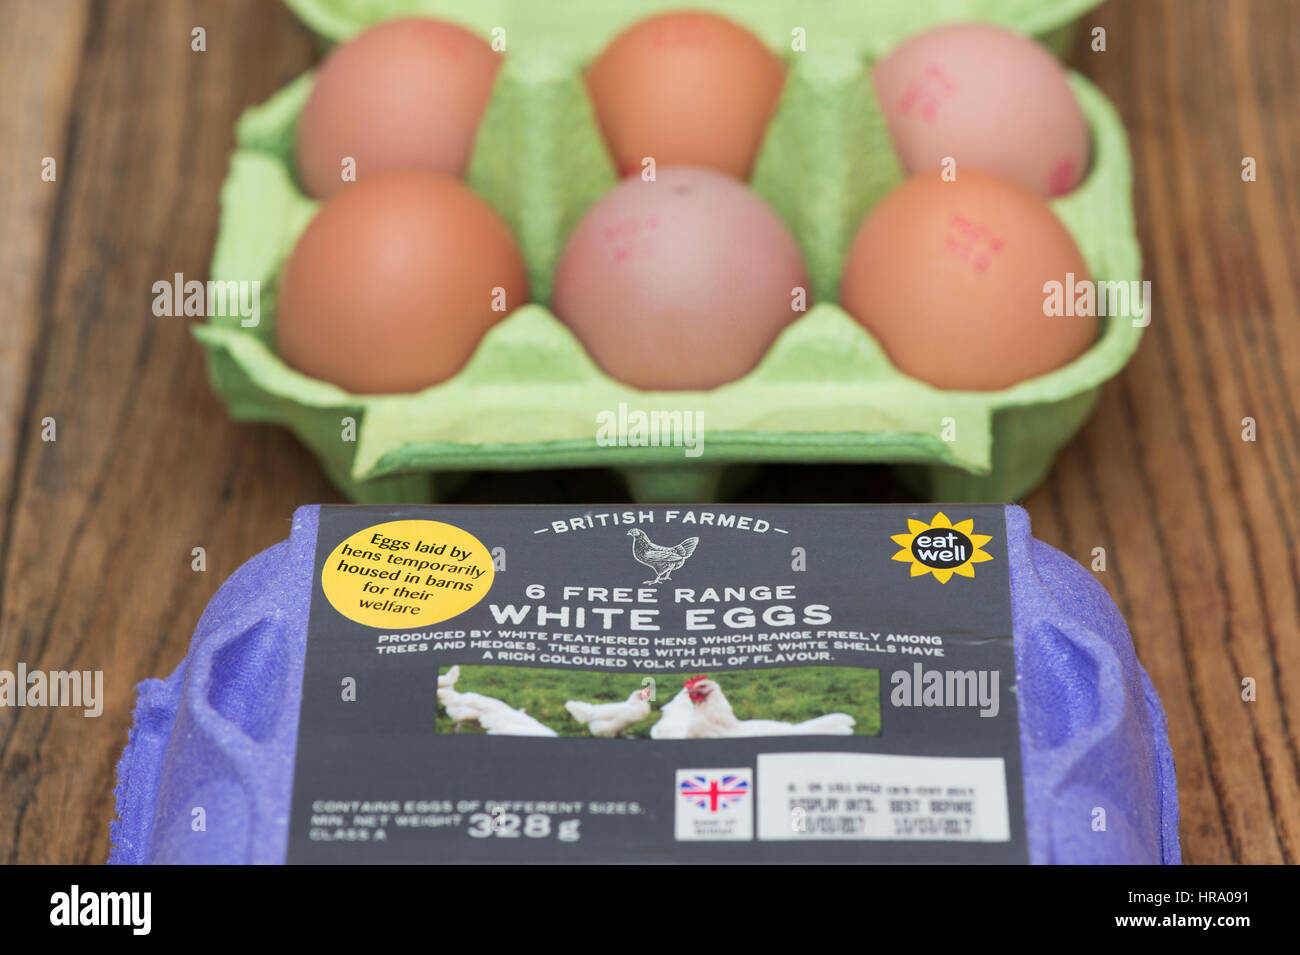 Sticker on a box of Free range eggs explaining hens housed in barns for their welfare during bird flu outbreak in the UK Stock Photo